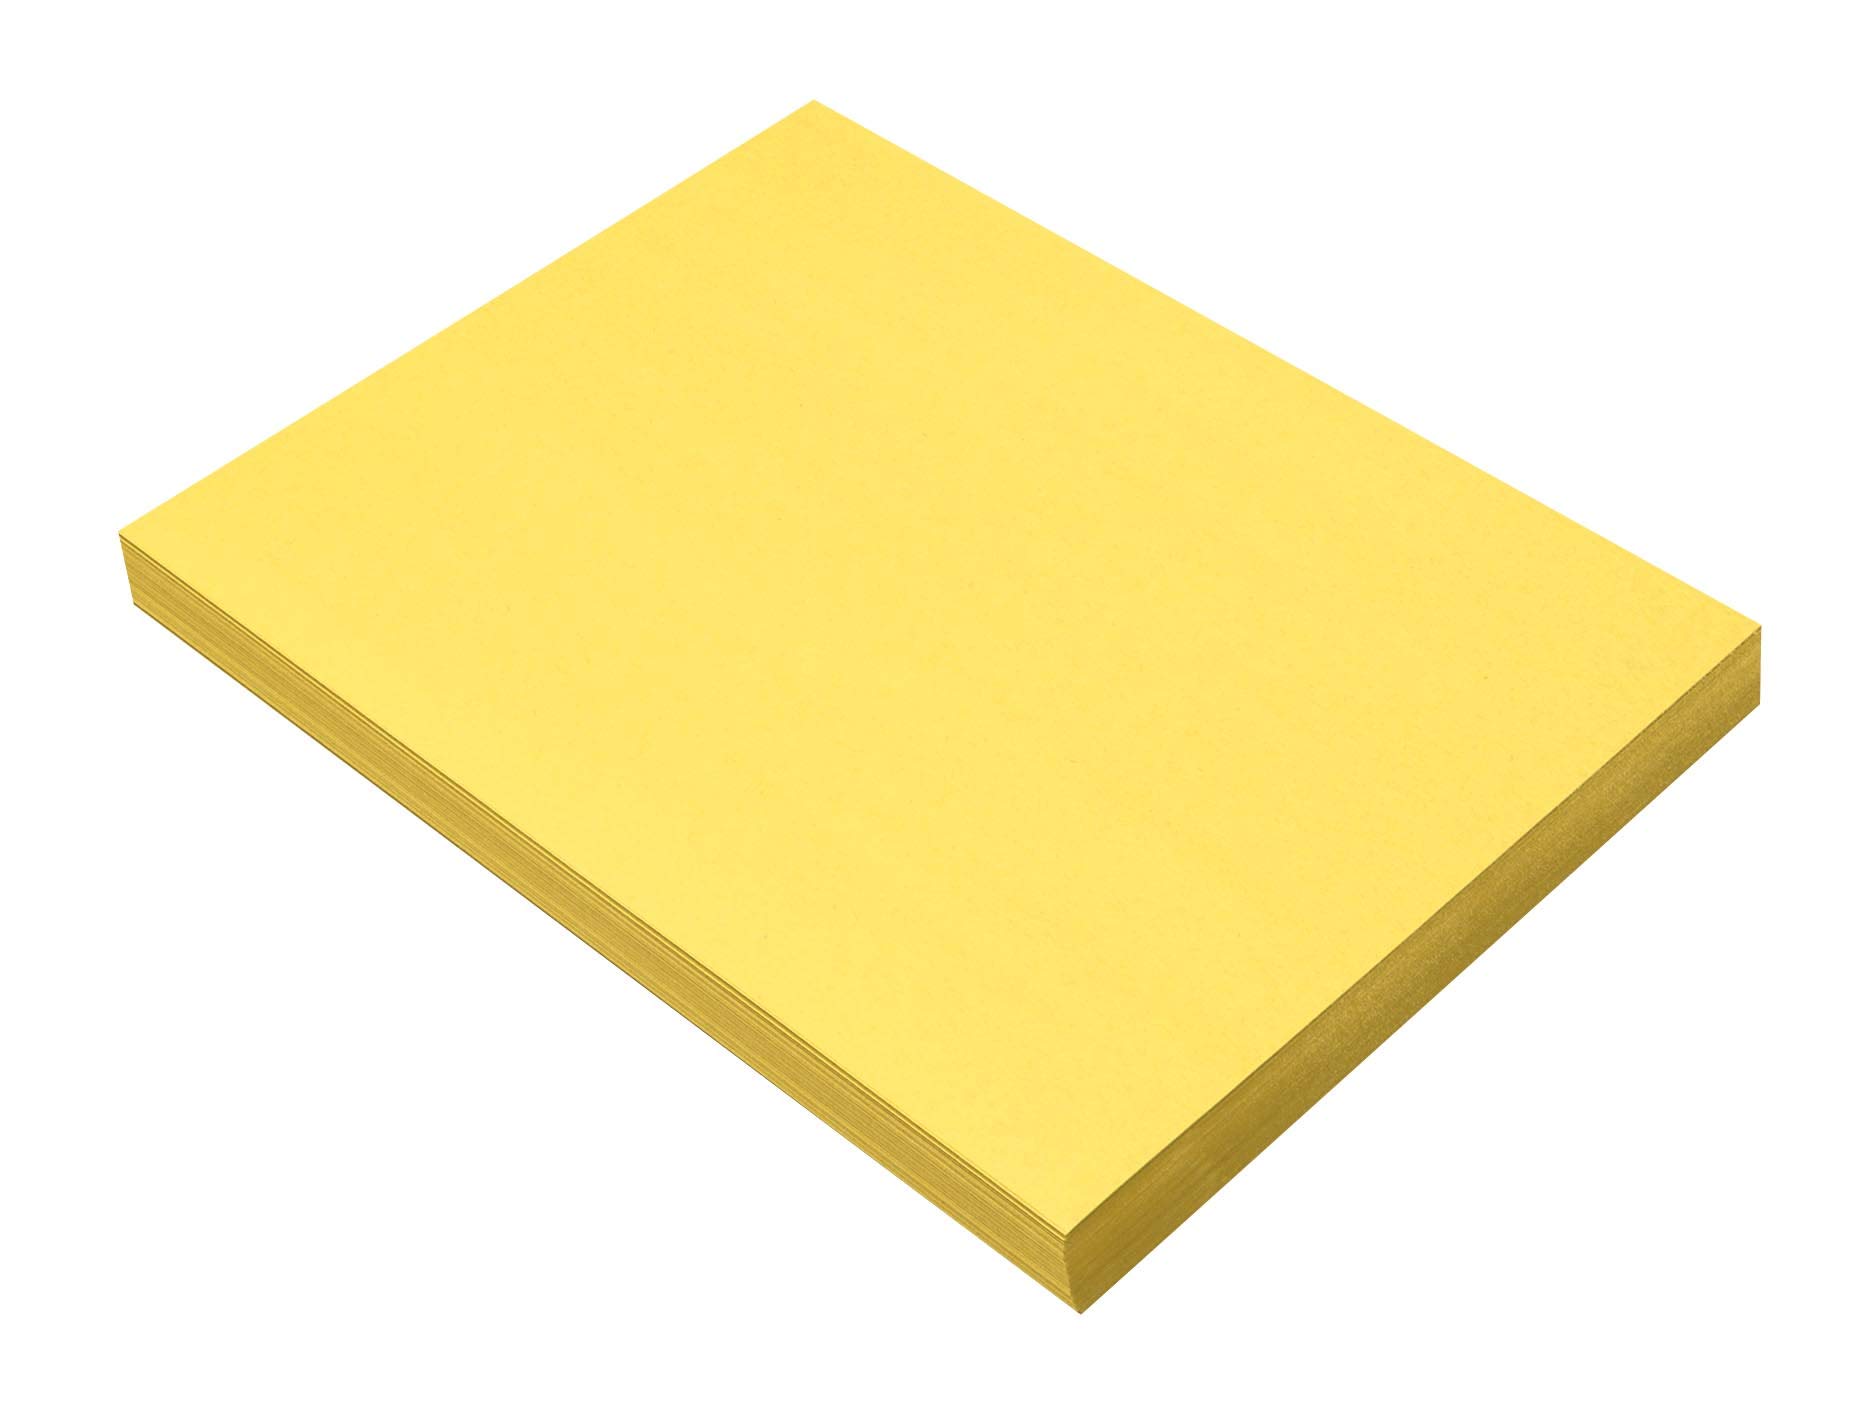 Prang (Formerly SunWorks) Construction Paper Yellow 9 x 12 100 Sheets